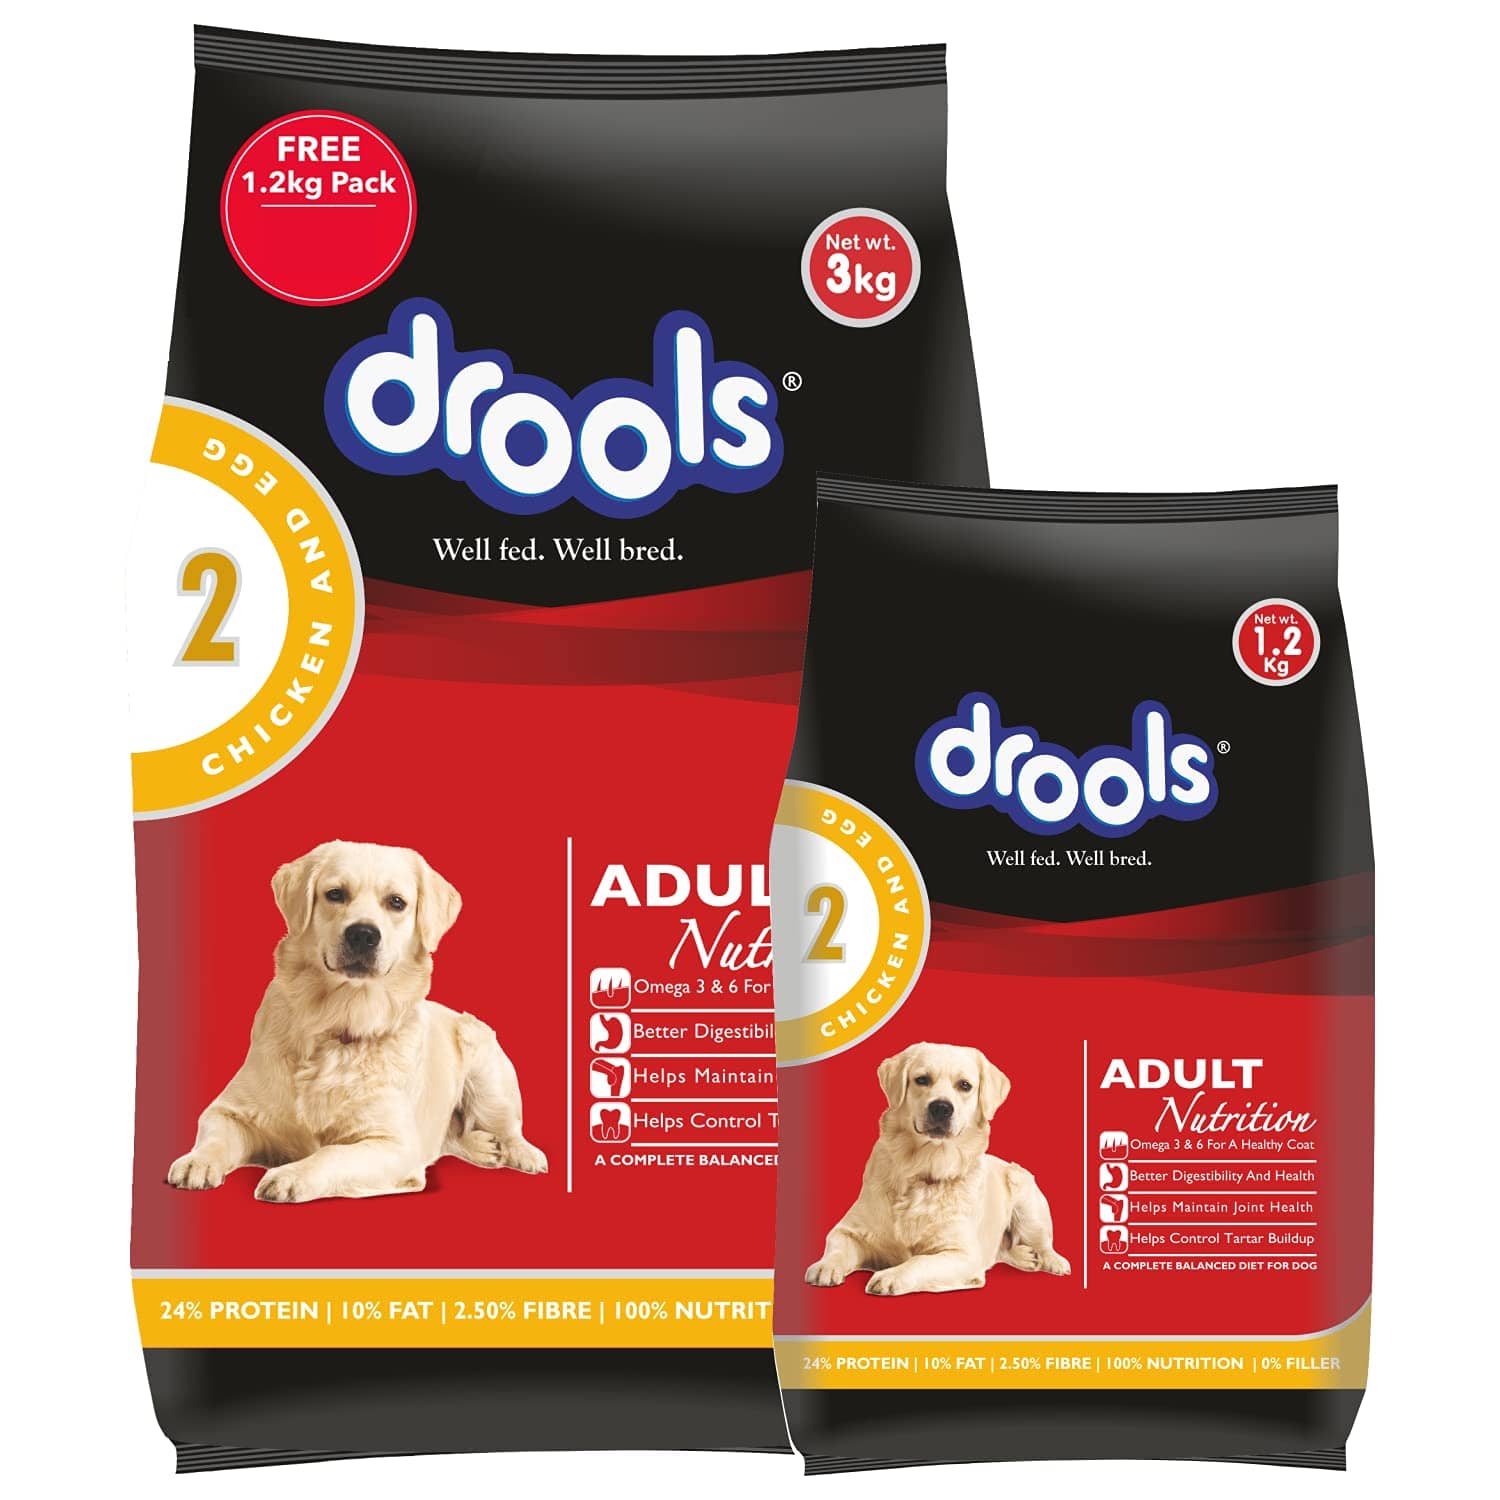 Drools Chicken and Egg Adult Dry Dog Food, 3 kg with Free 1.2 kg